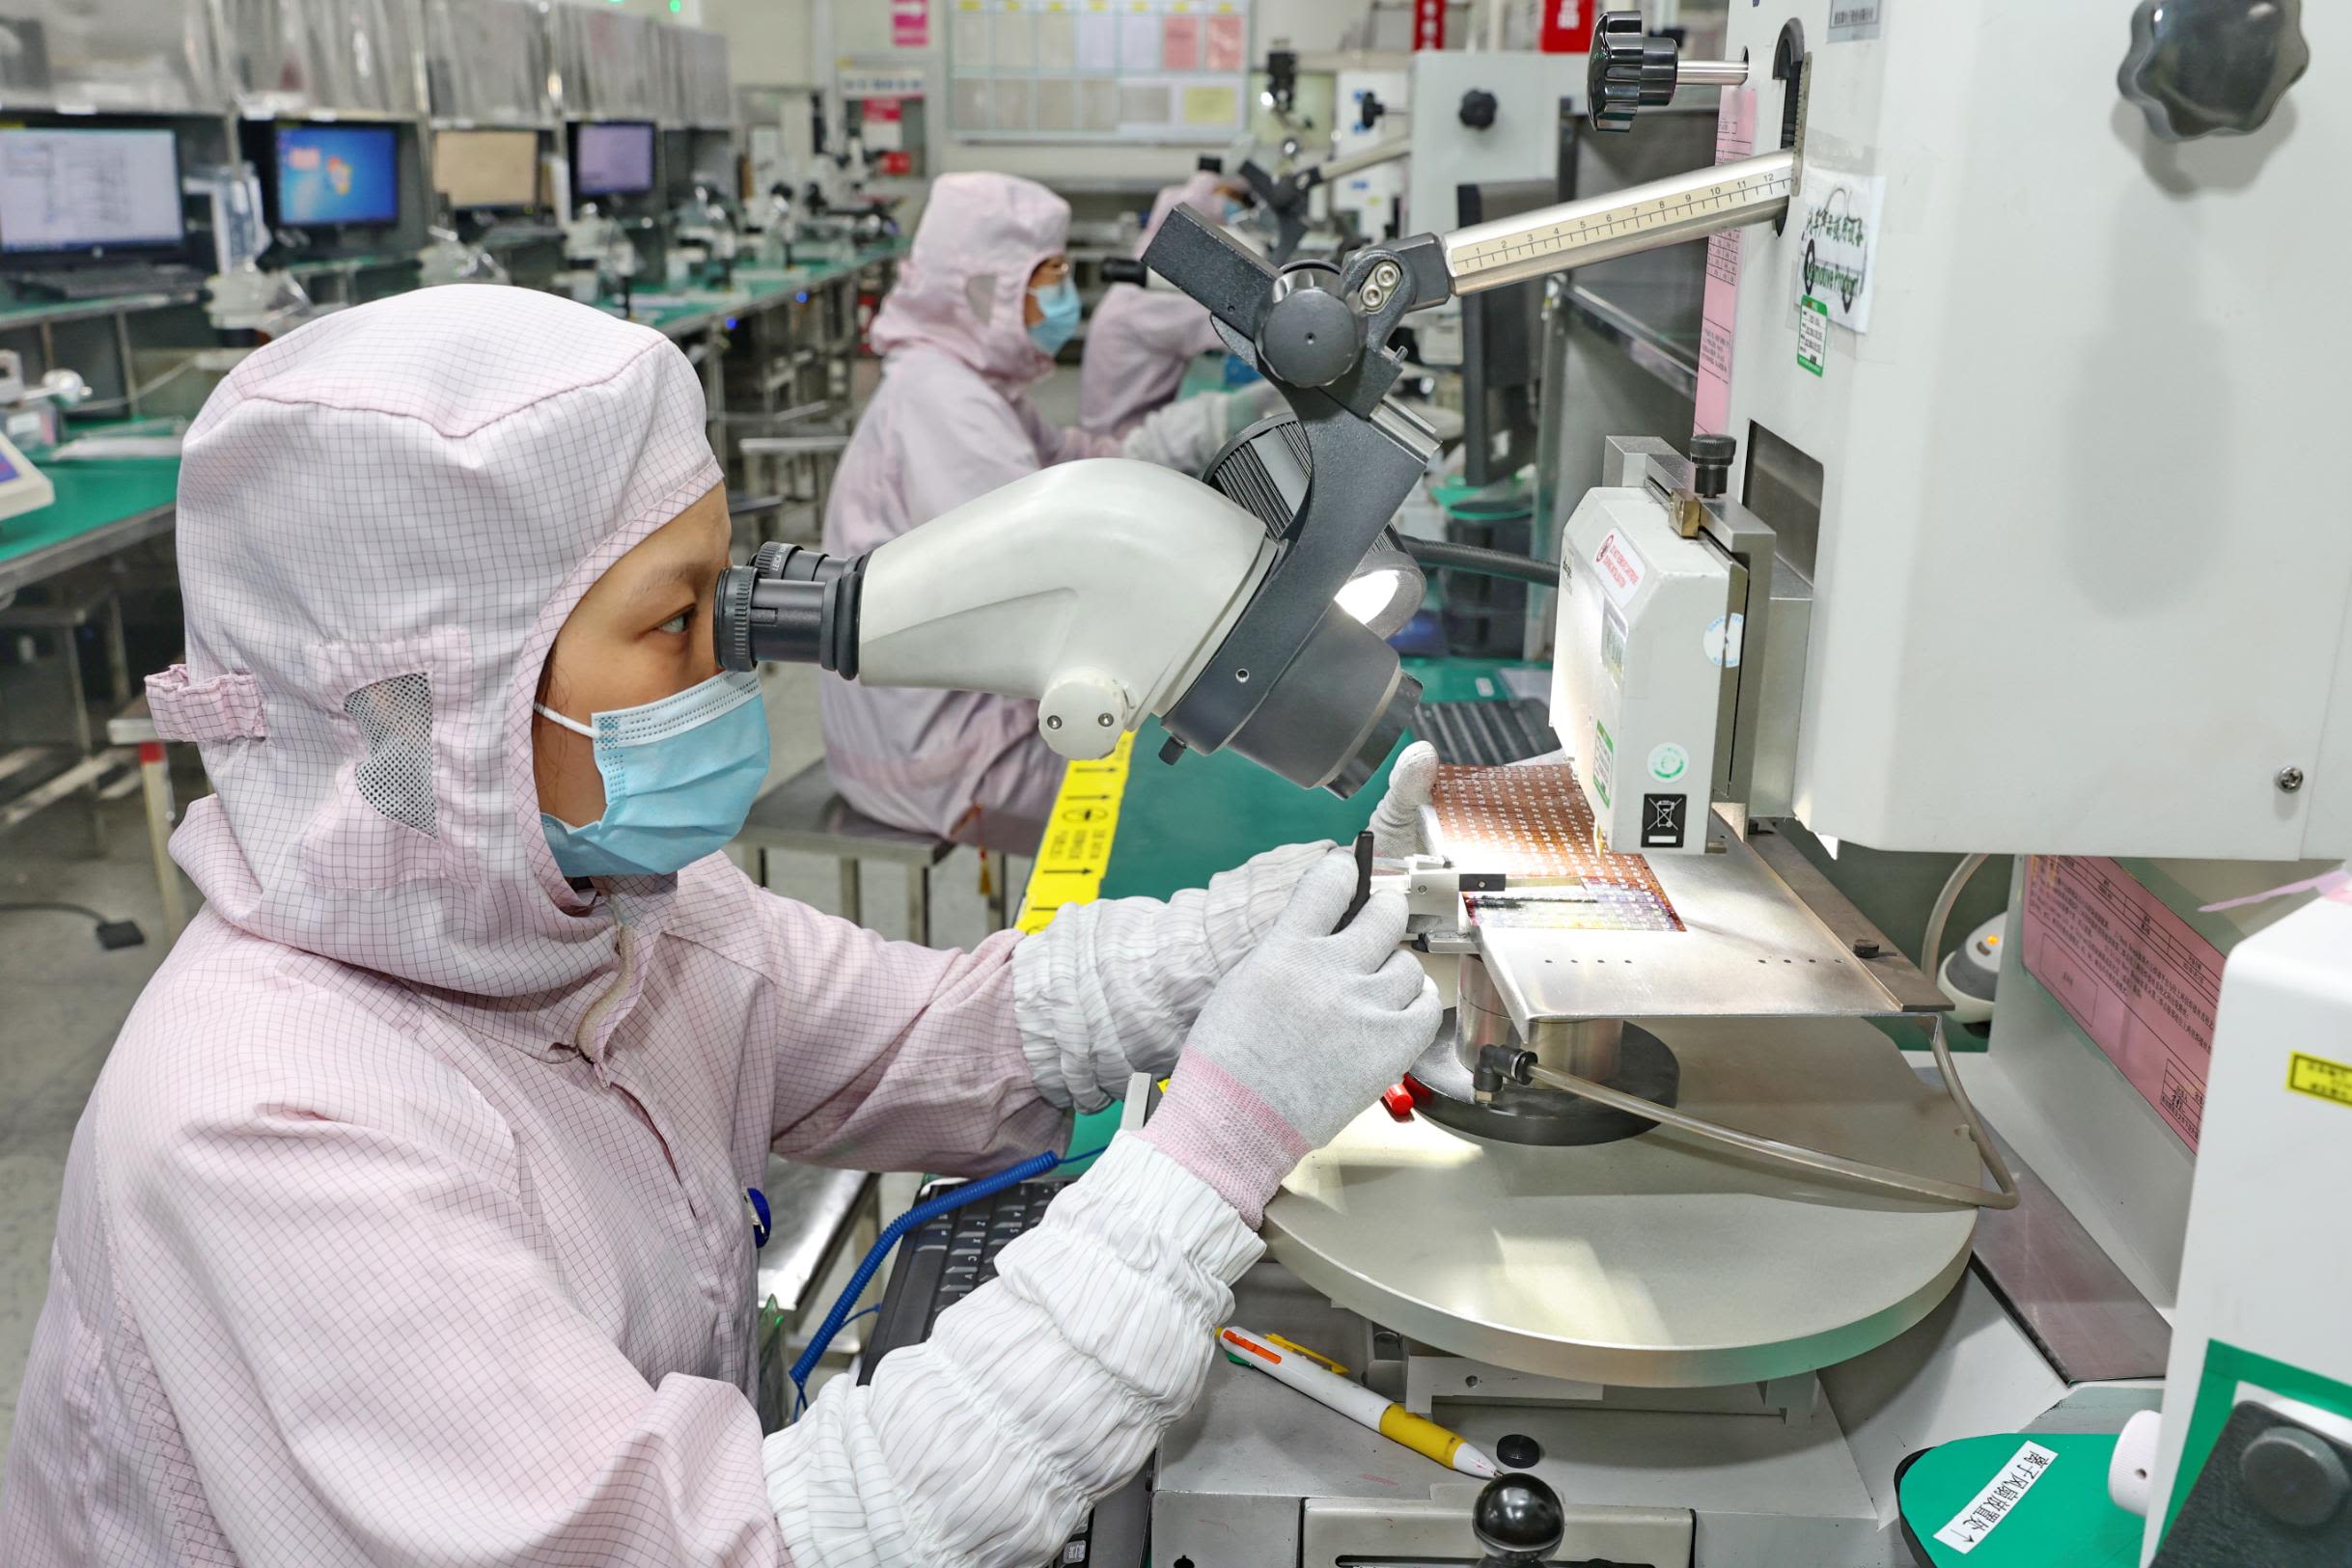 China Restricts Chip Exports As US Weighs New Sanctions